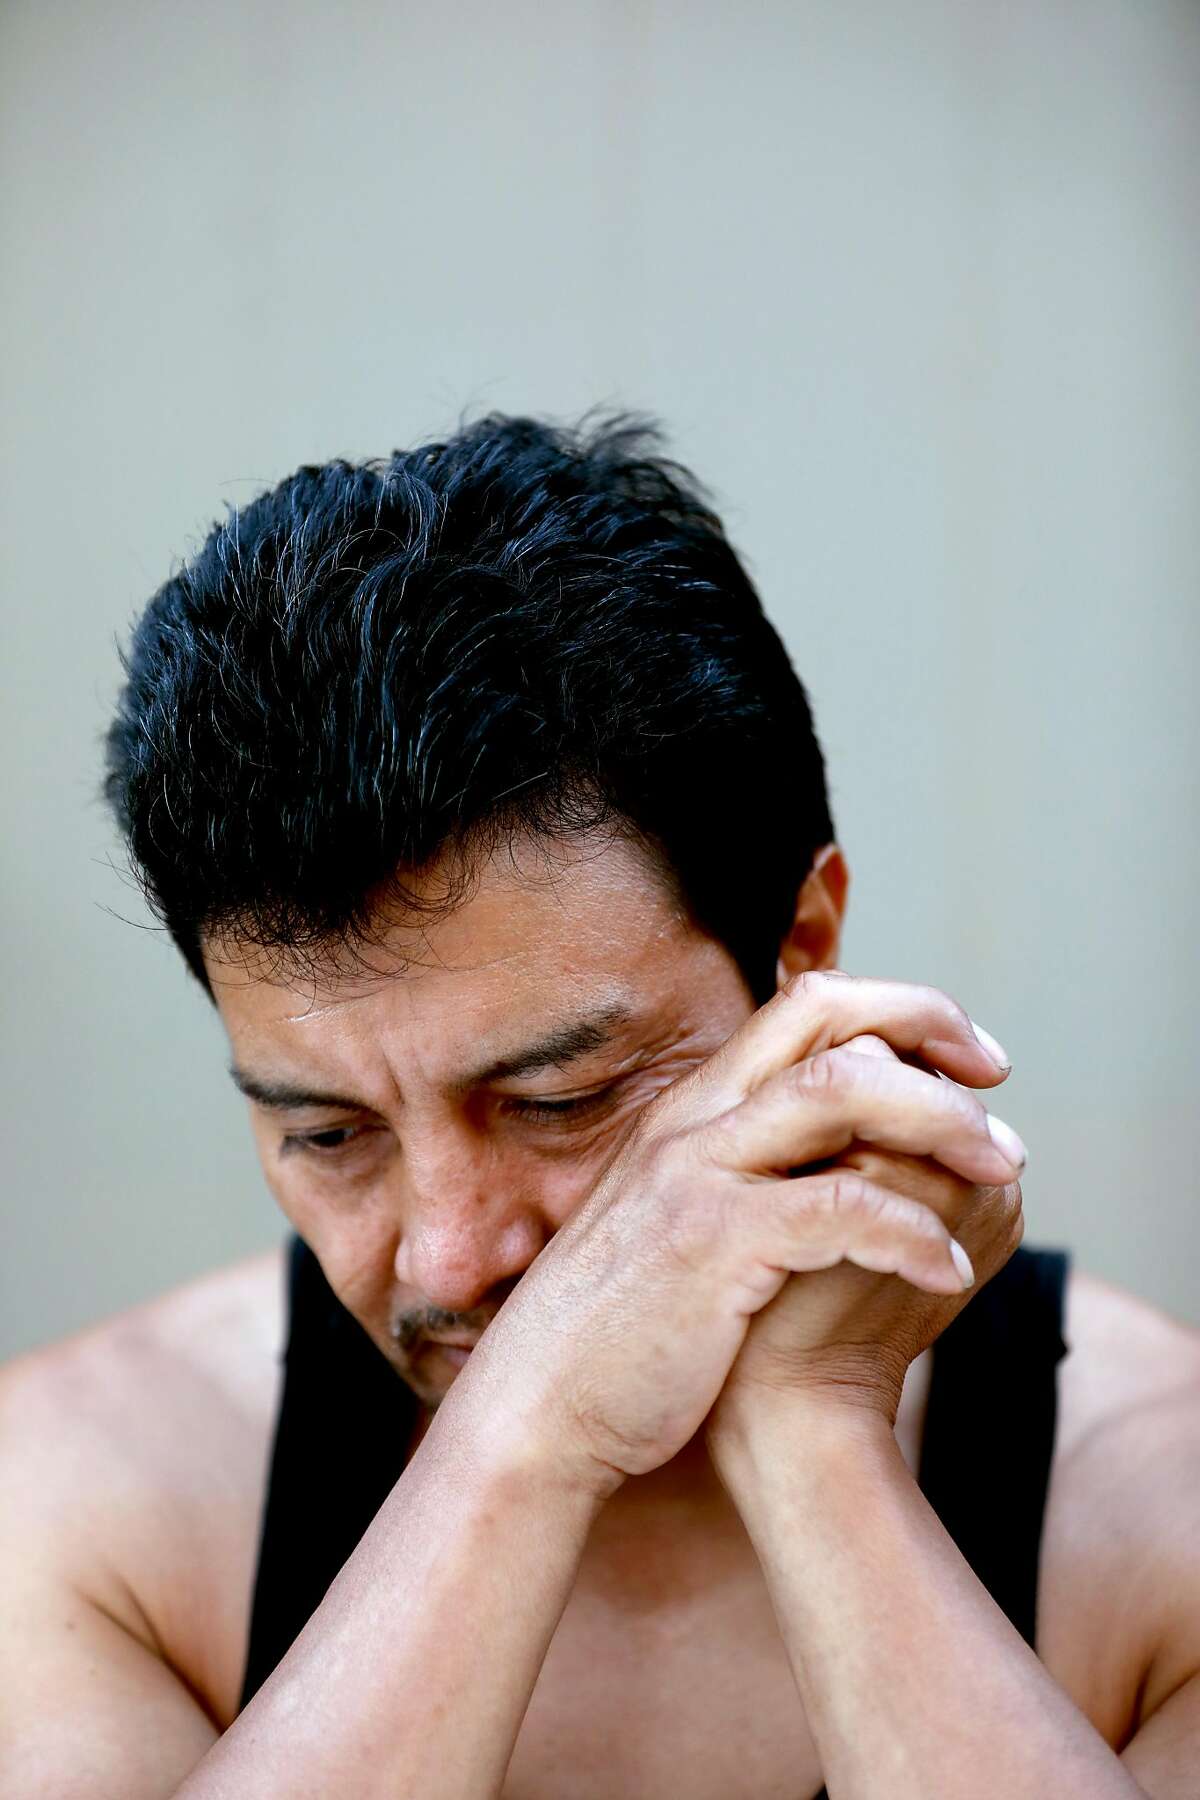 Raul Lopez, 47, remembers his late brother who passed away in 2017 as he sits at his home in Richmond, Calif., on Tuesday, September 24, 2019. Lopez, originally from Guatemala, is an undocumented immigrant who was detained by ICE for 2 years before being released in February.